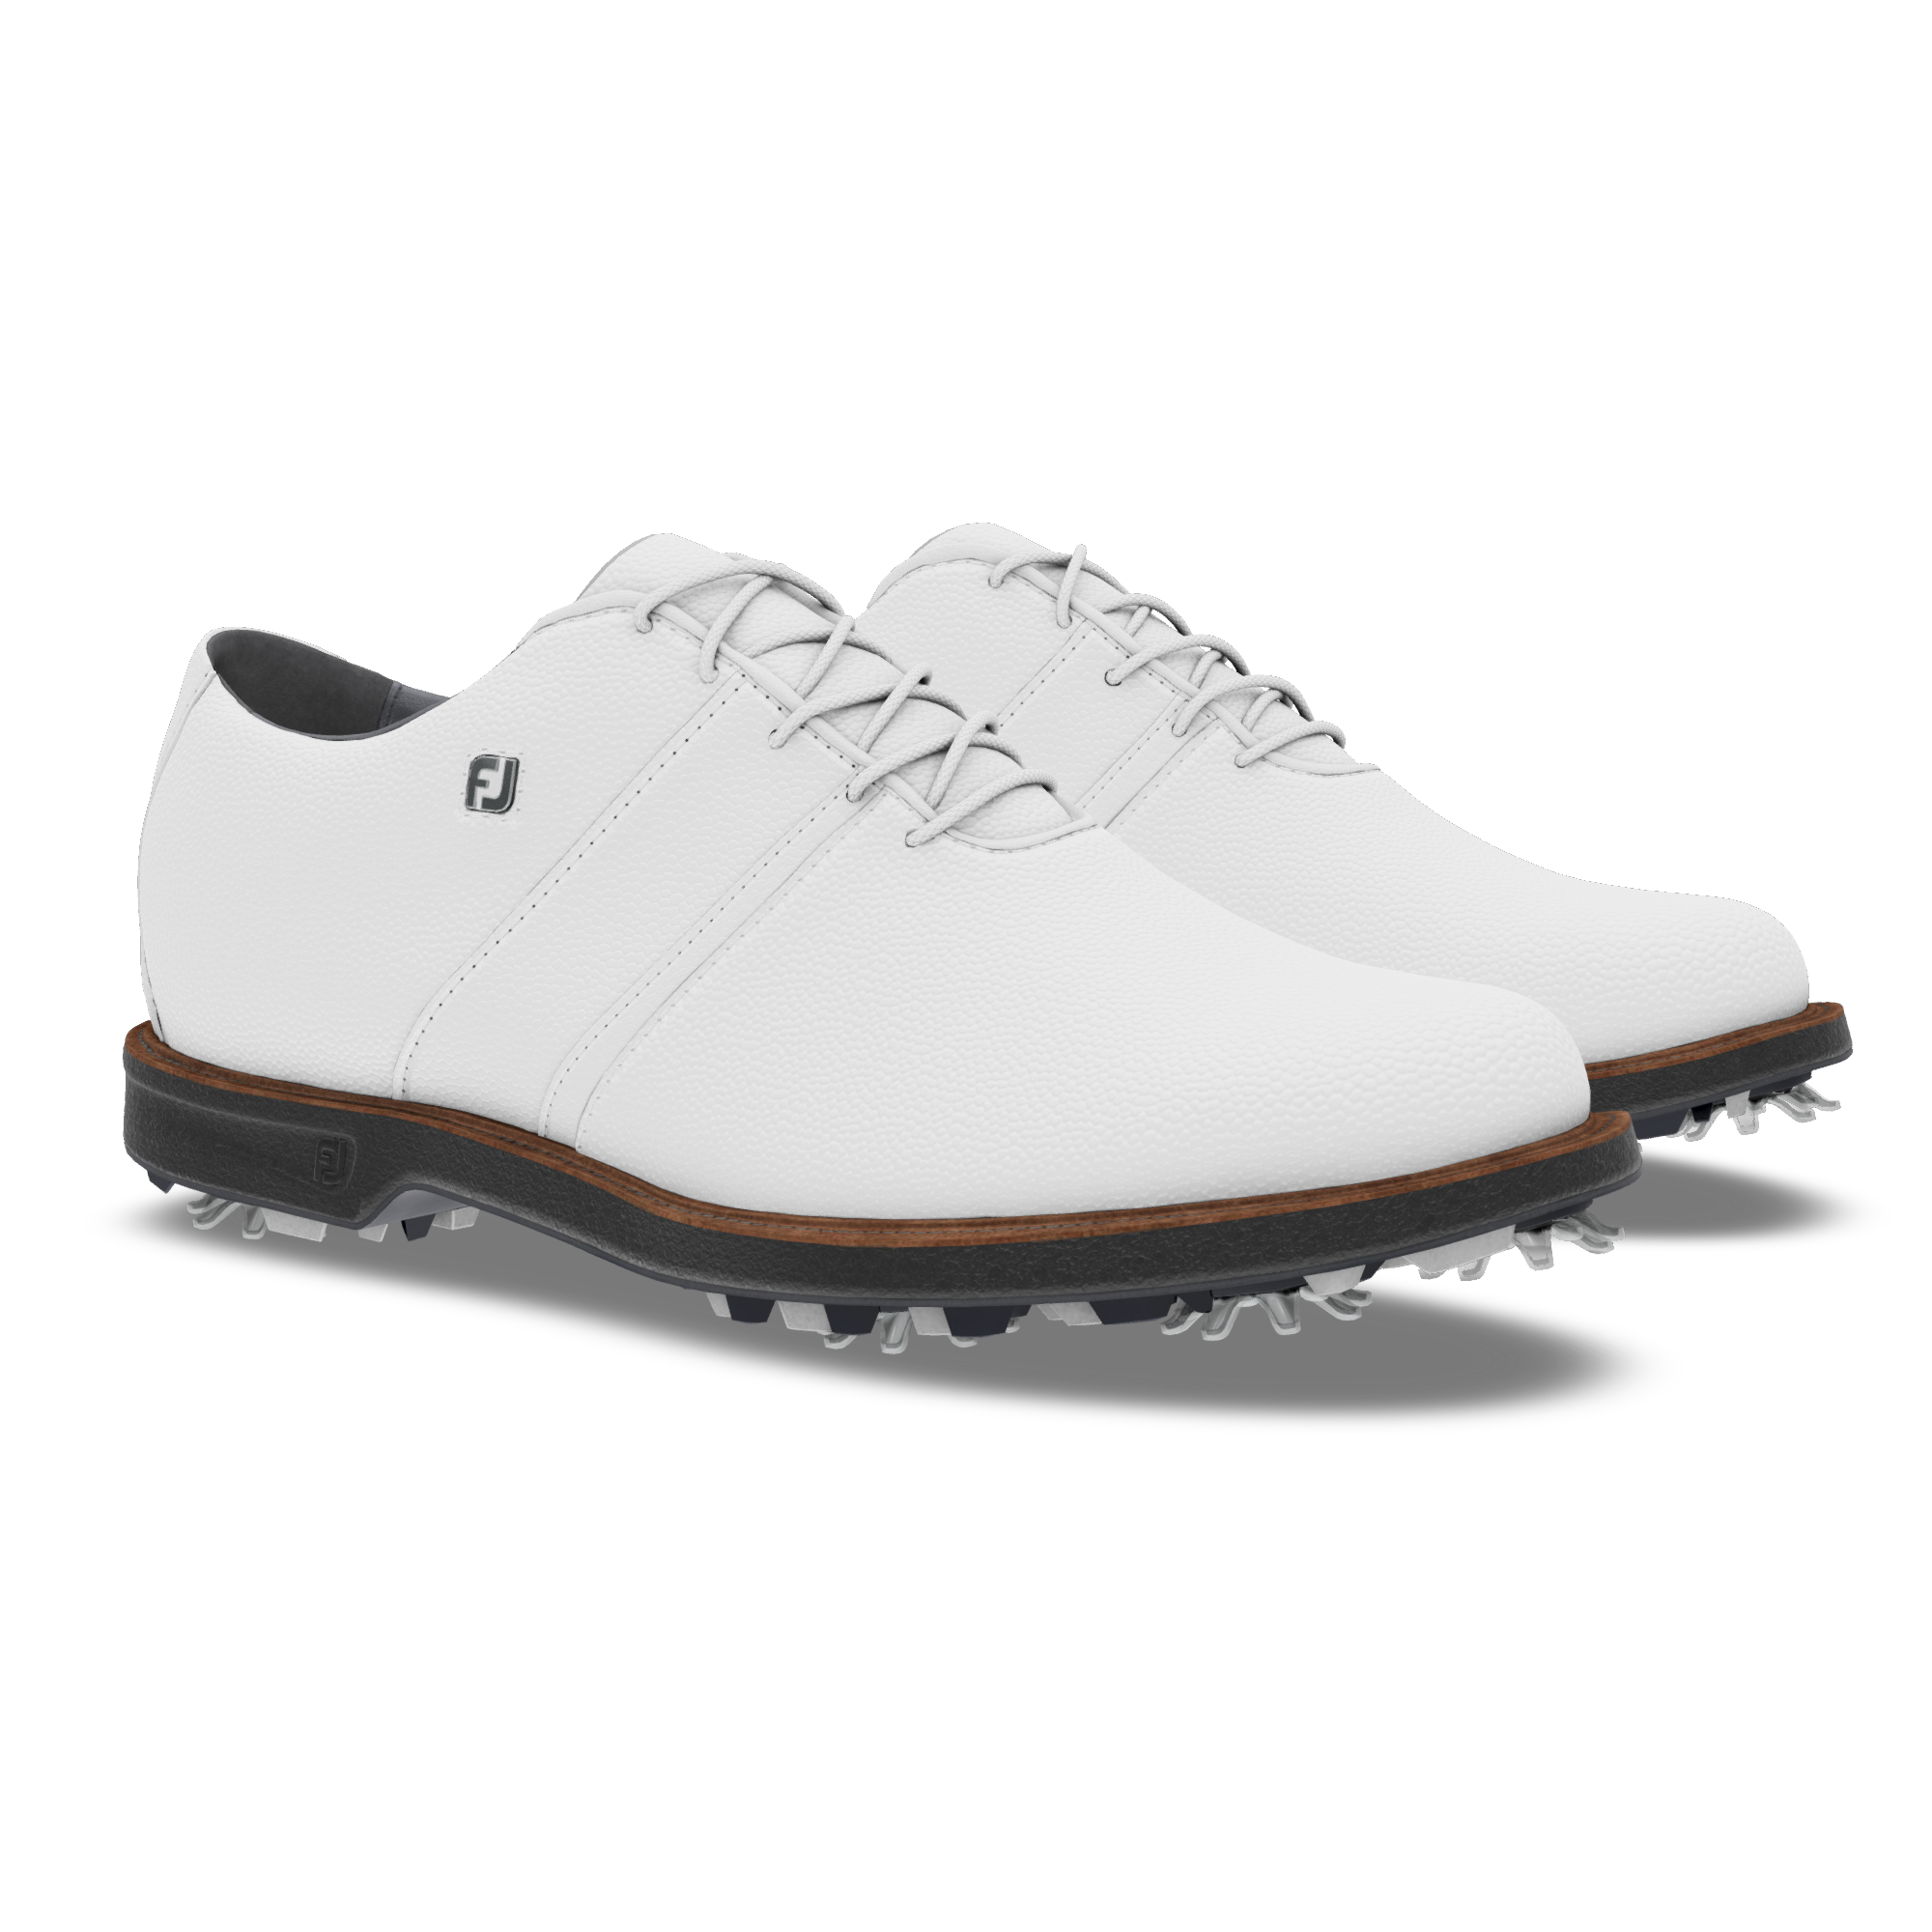 MyJoys Premiere Series Traditional Women